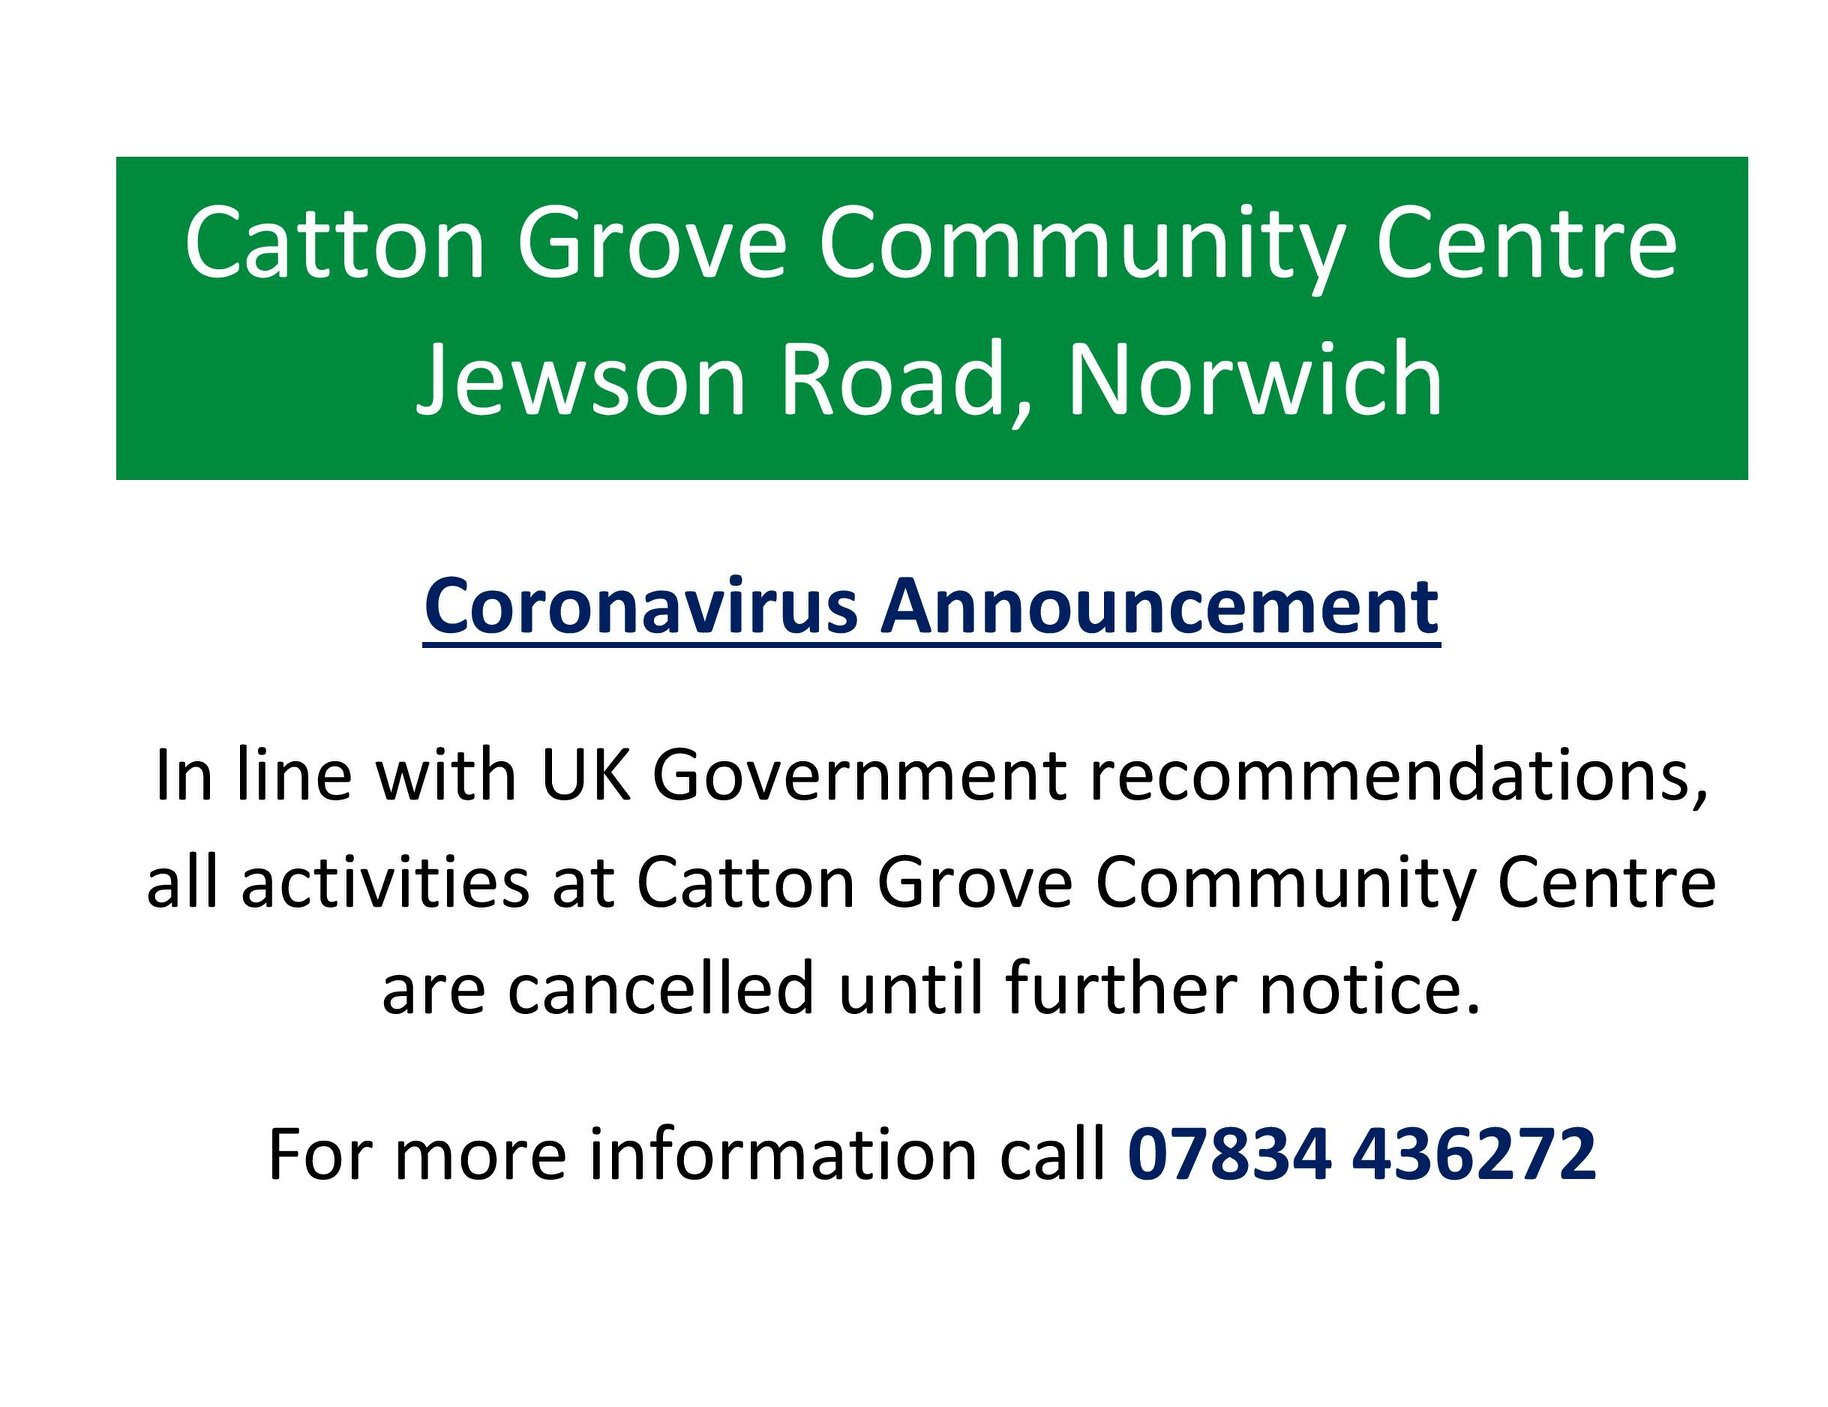 Catton Grove Community Centre is closed for all community activities until further notice